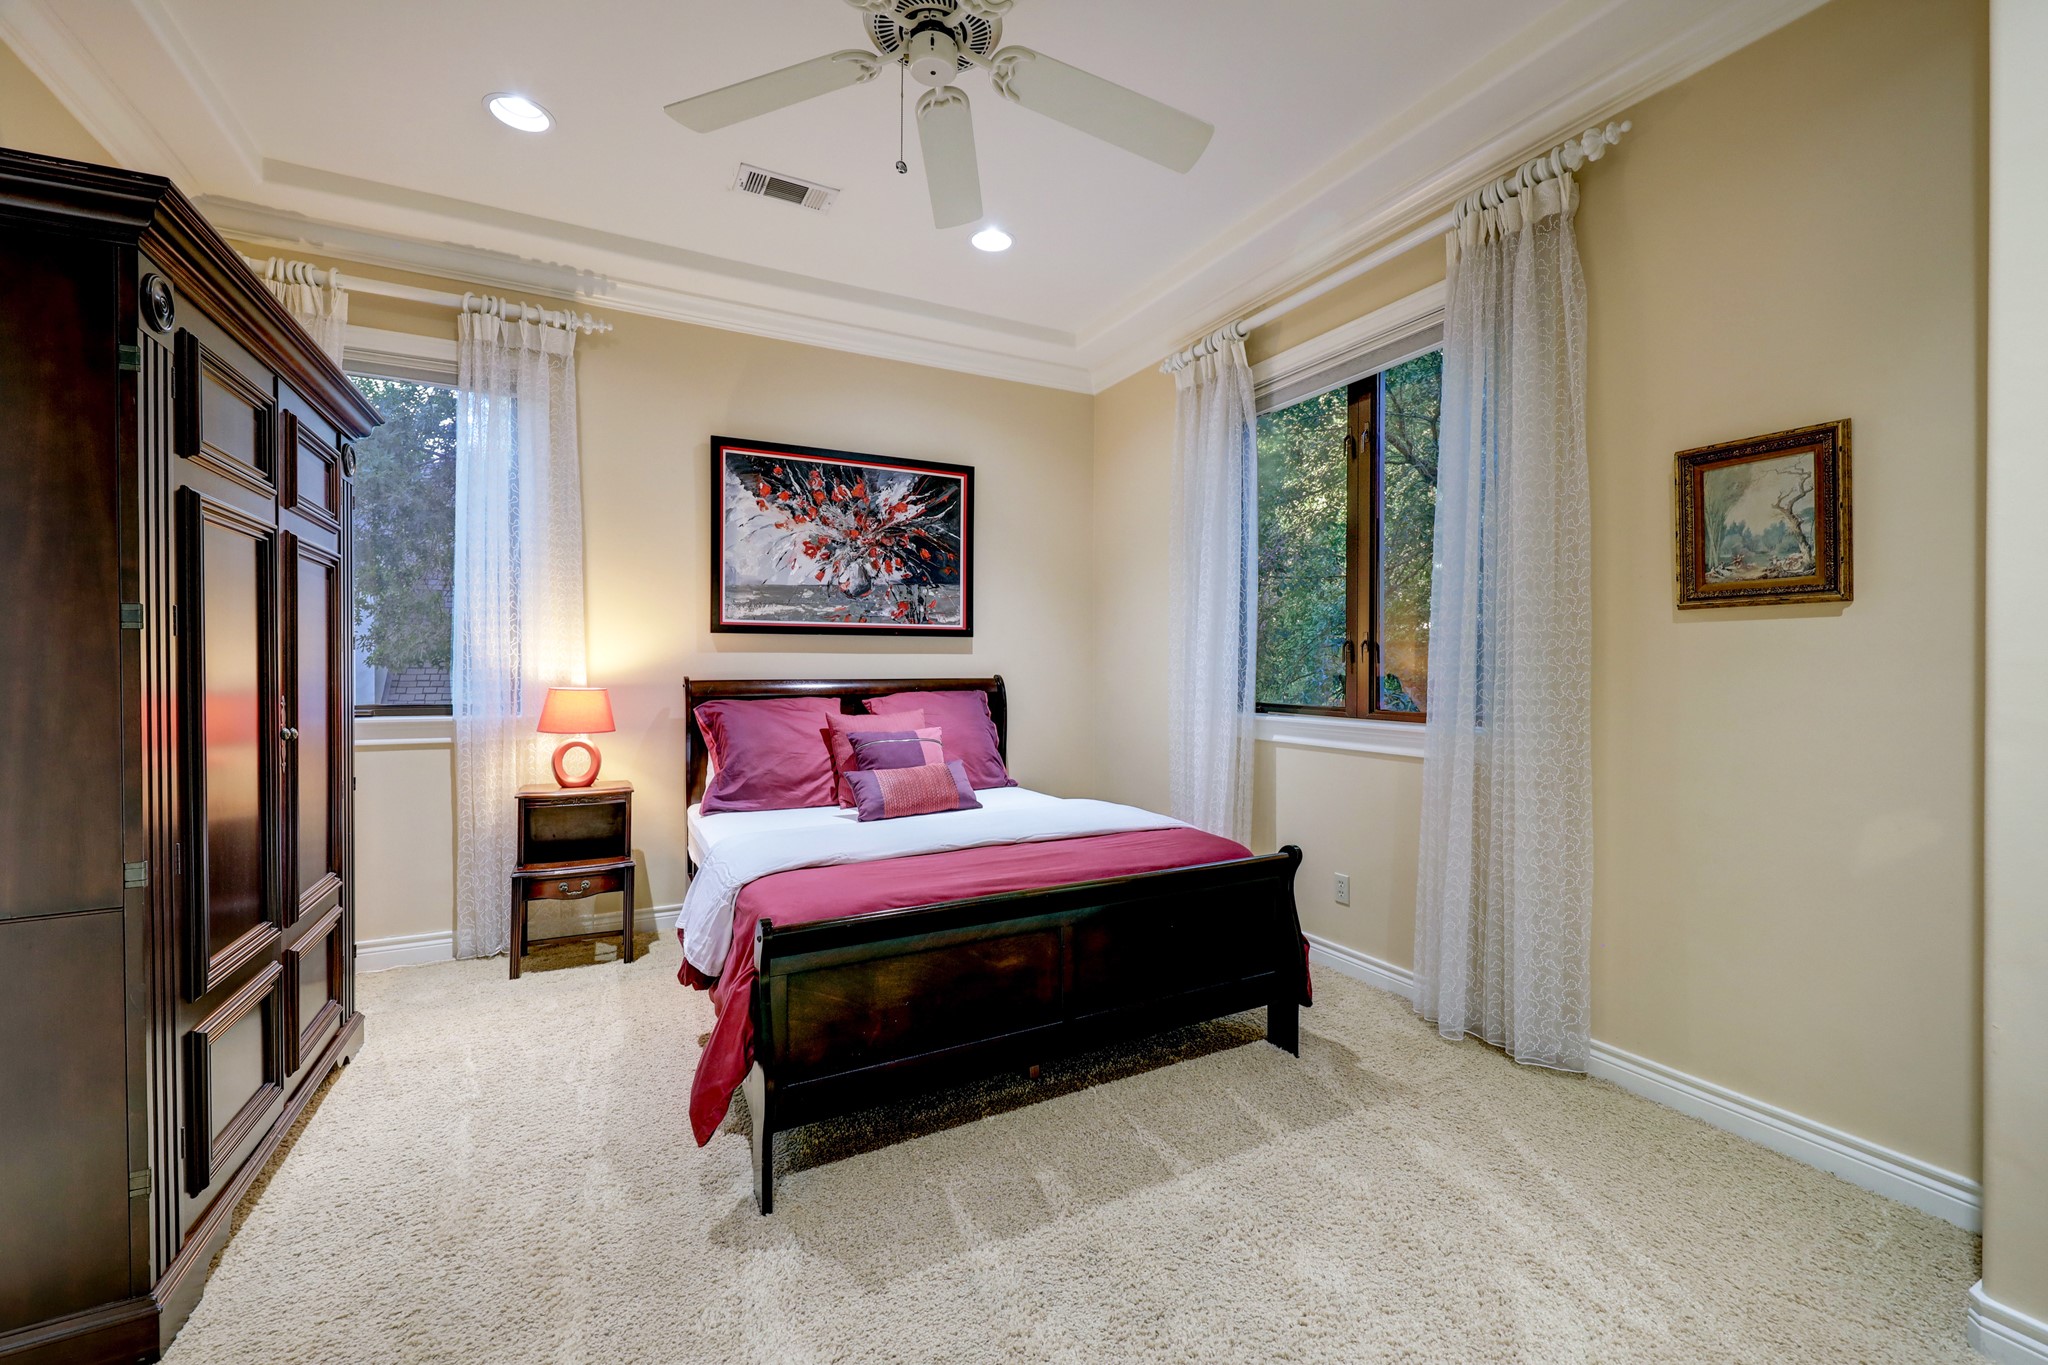 This Secondary Bedroom [18 x 13] features carpet, crown molding and baseboards, a tray ceiling a walk-in closet and en-suite bathroom.